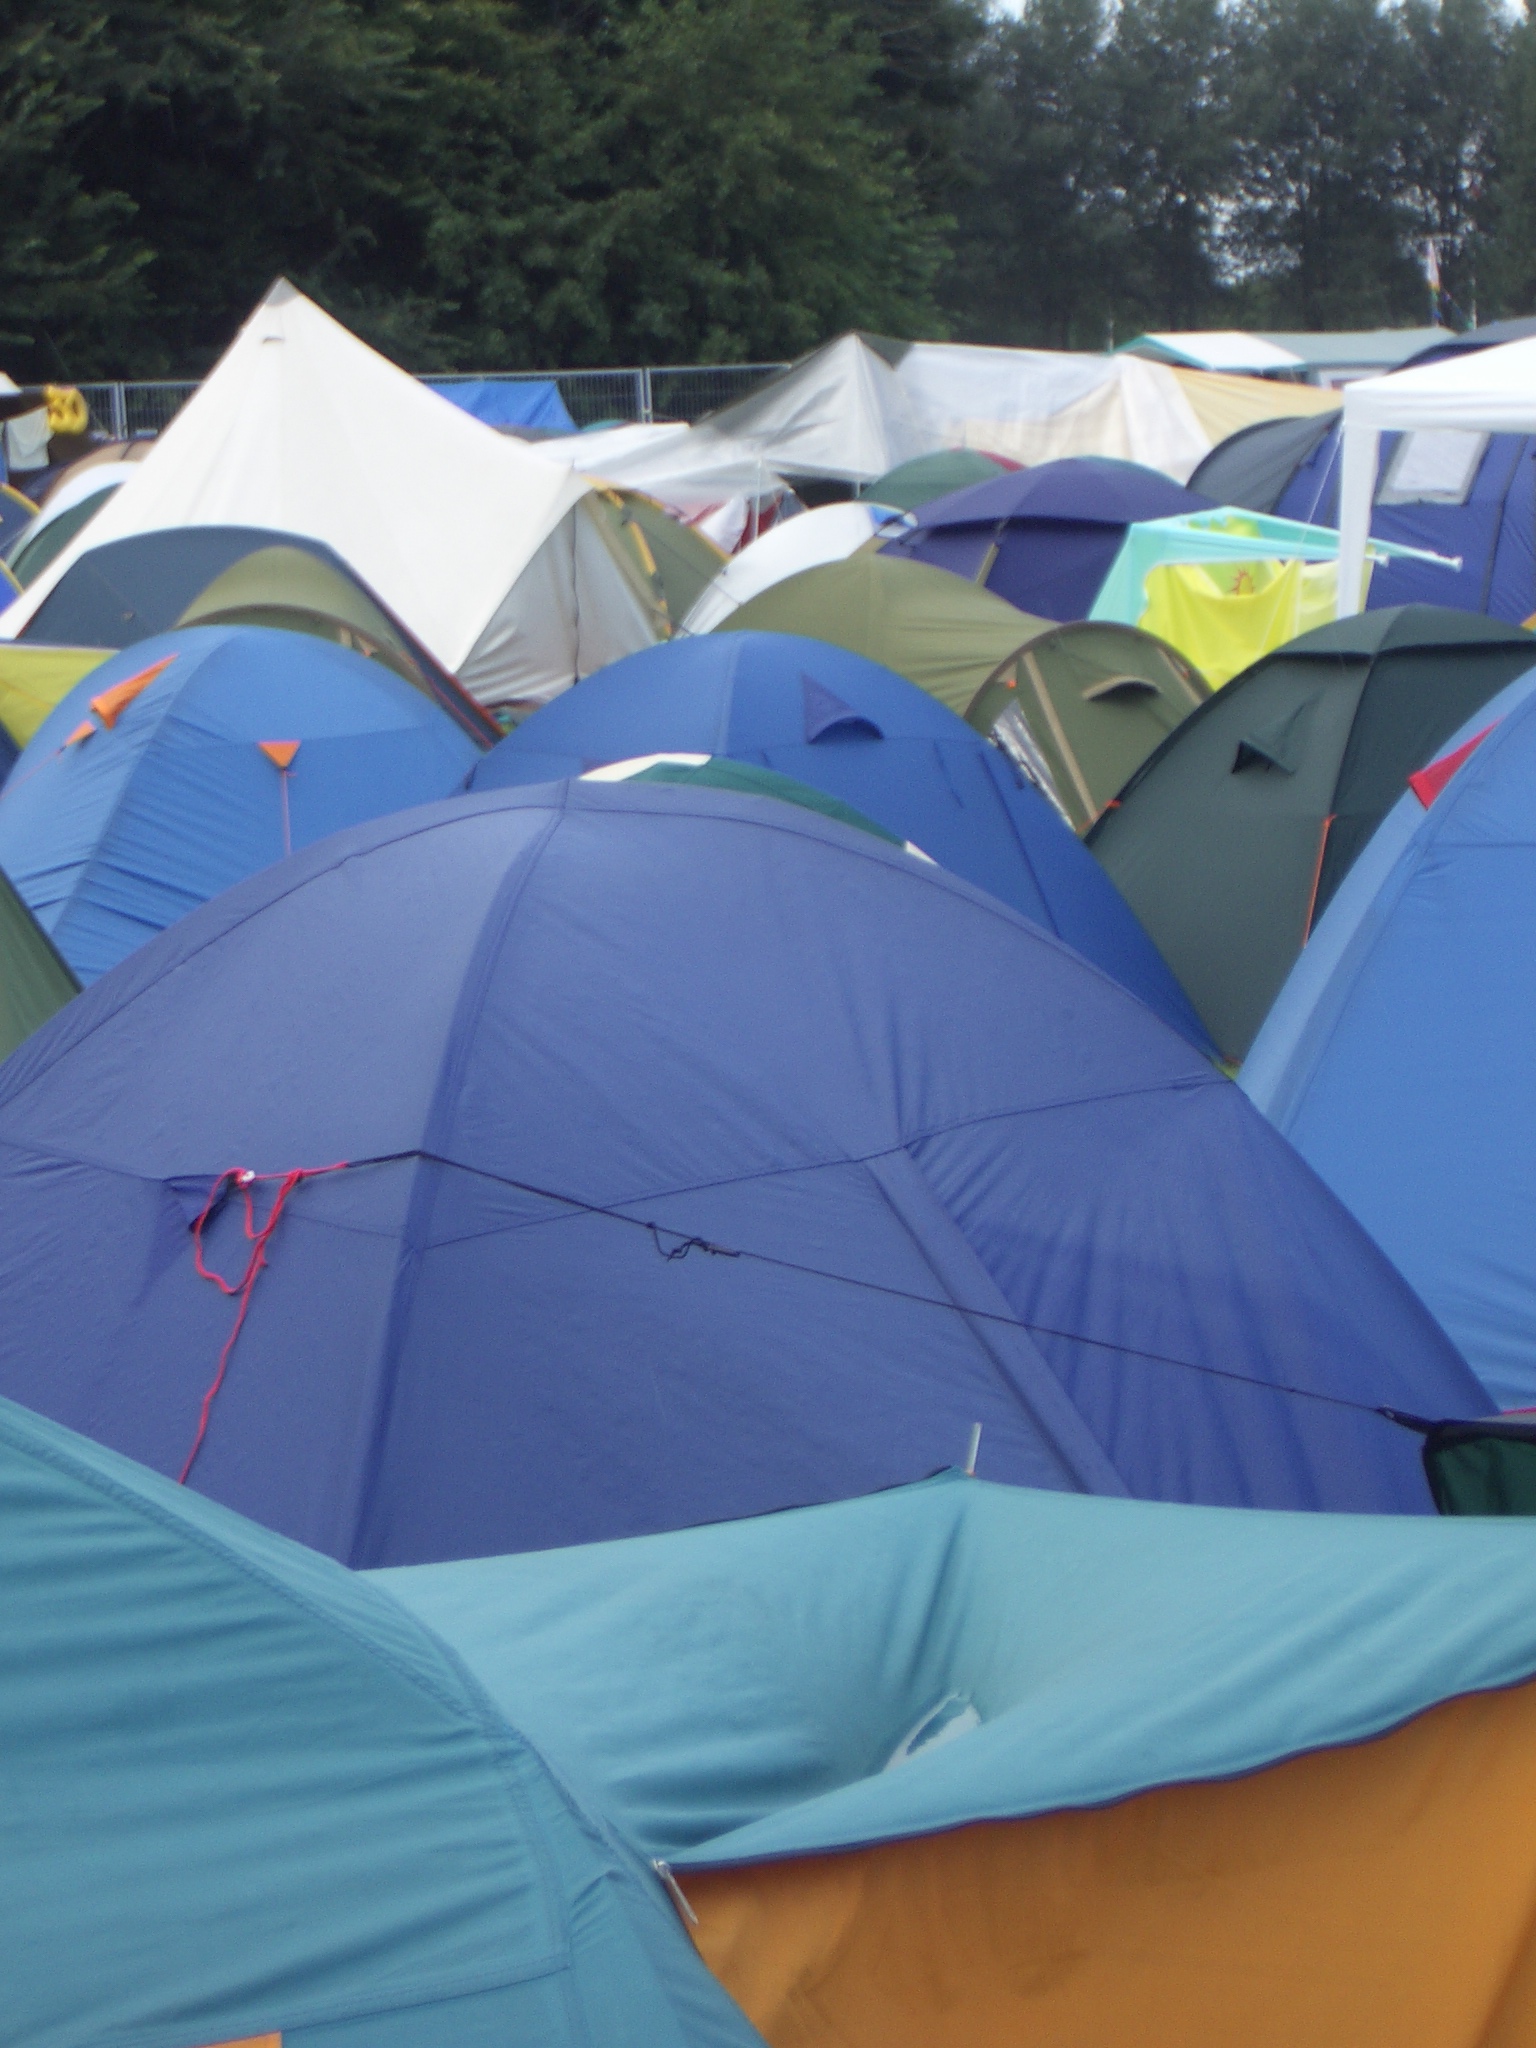 a large number of tents are set up